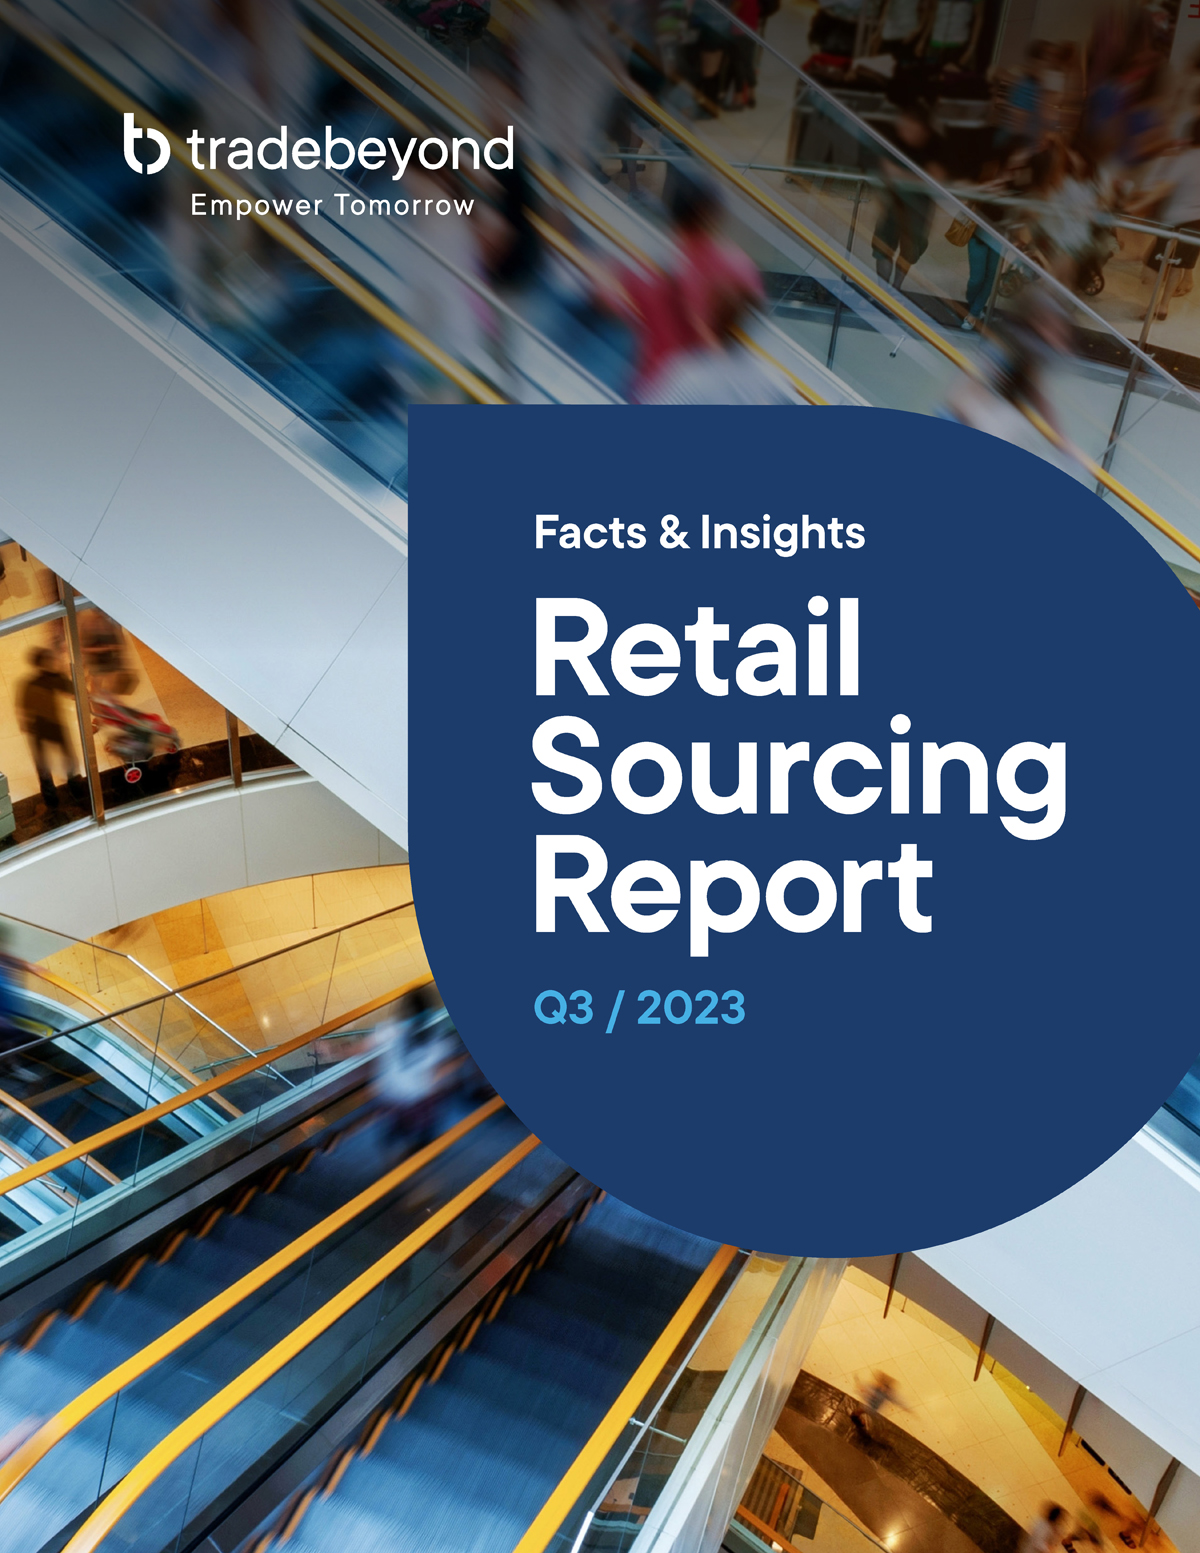 Tradebeyond retail sourcing report q3 2023 cover